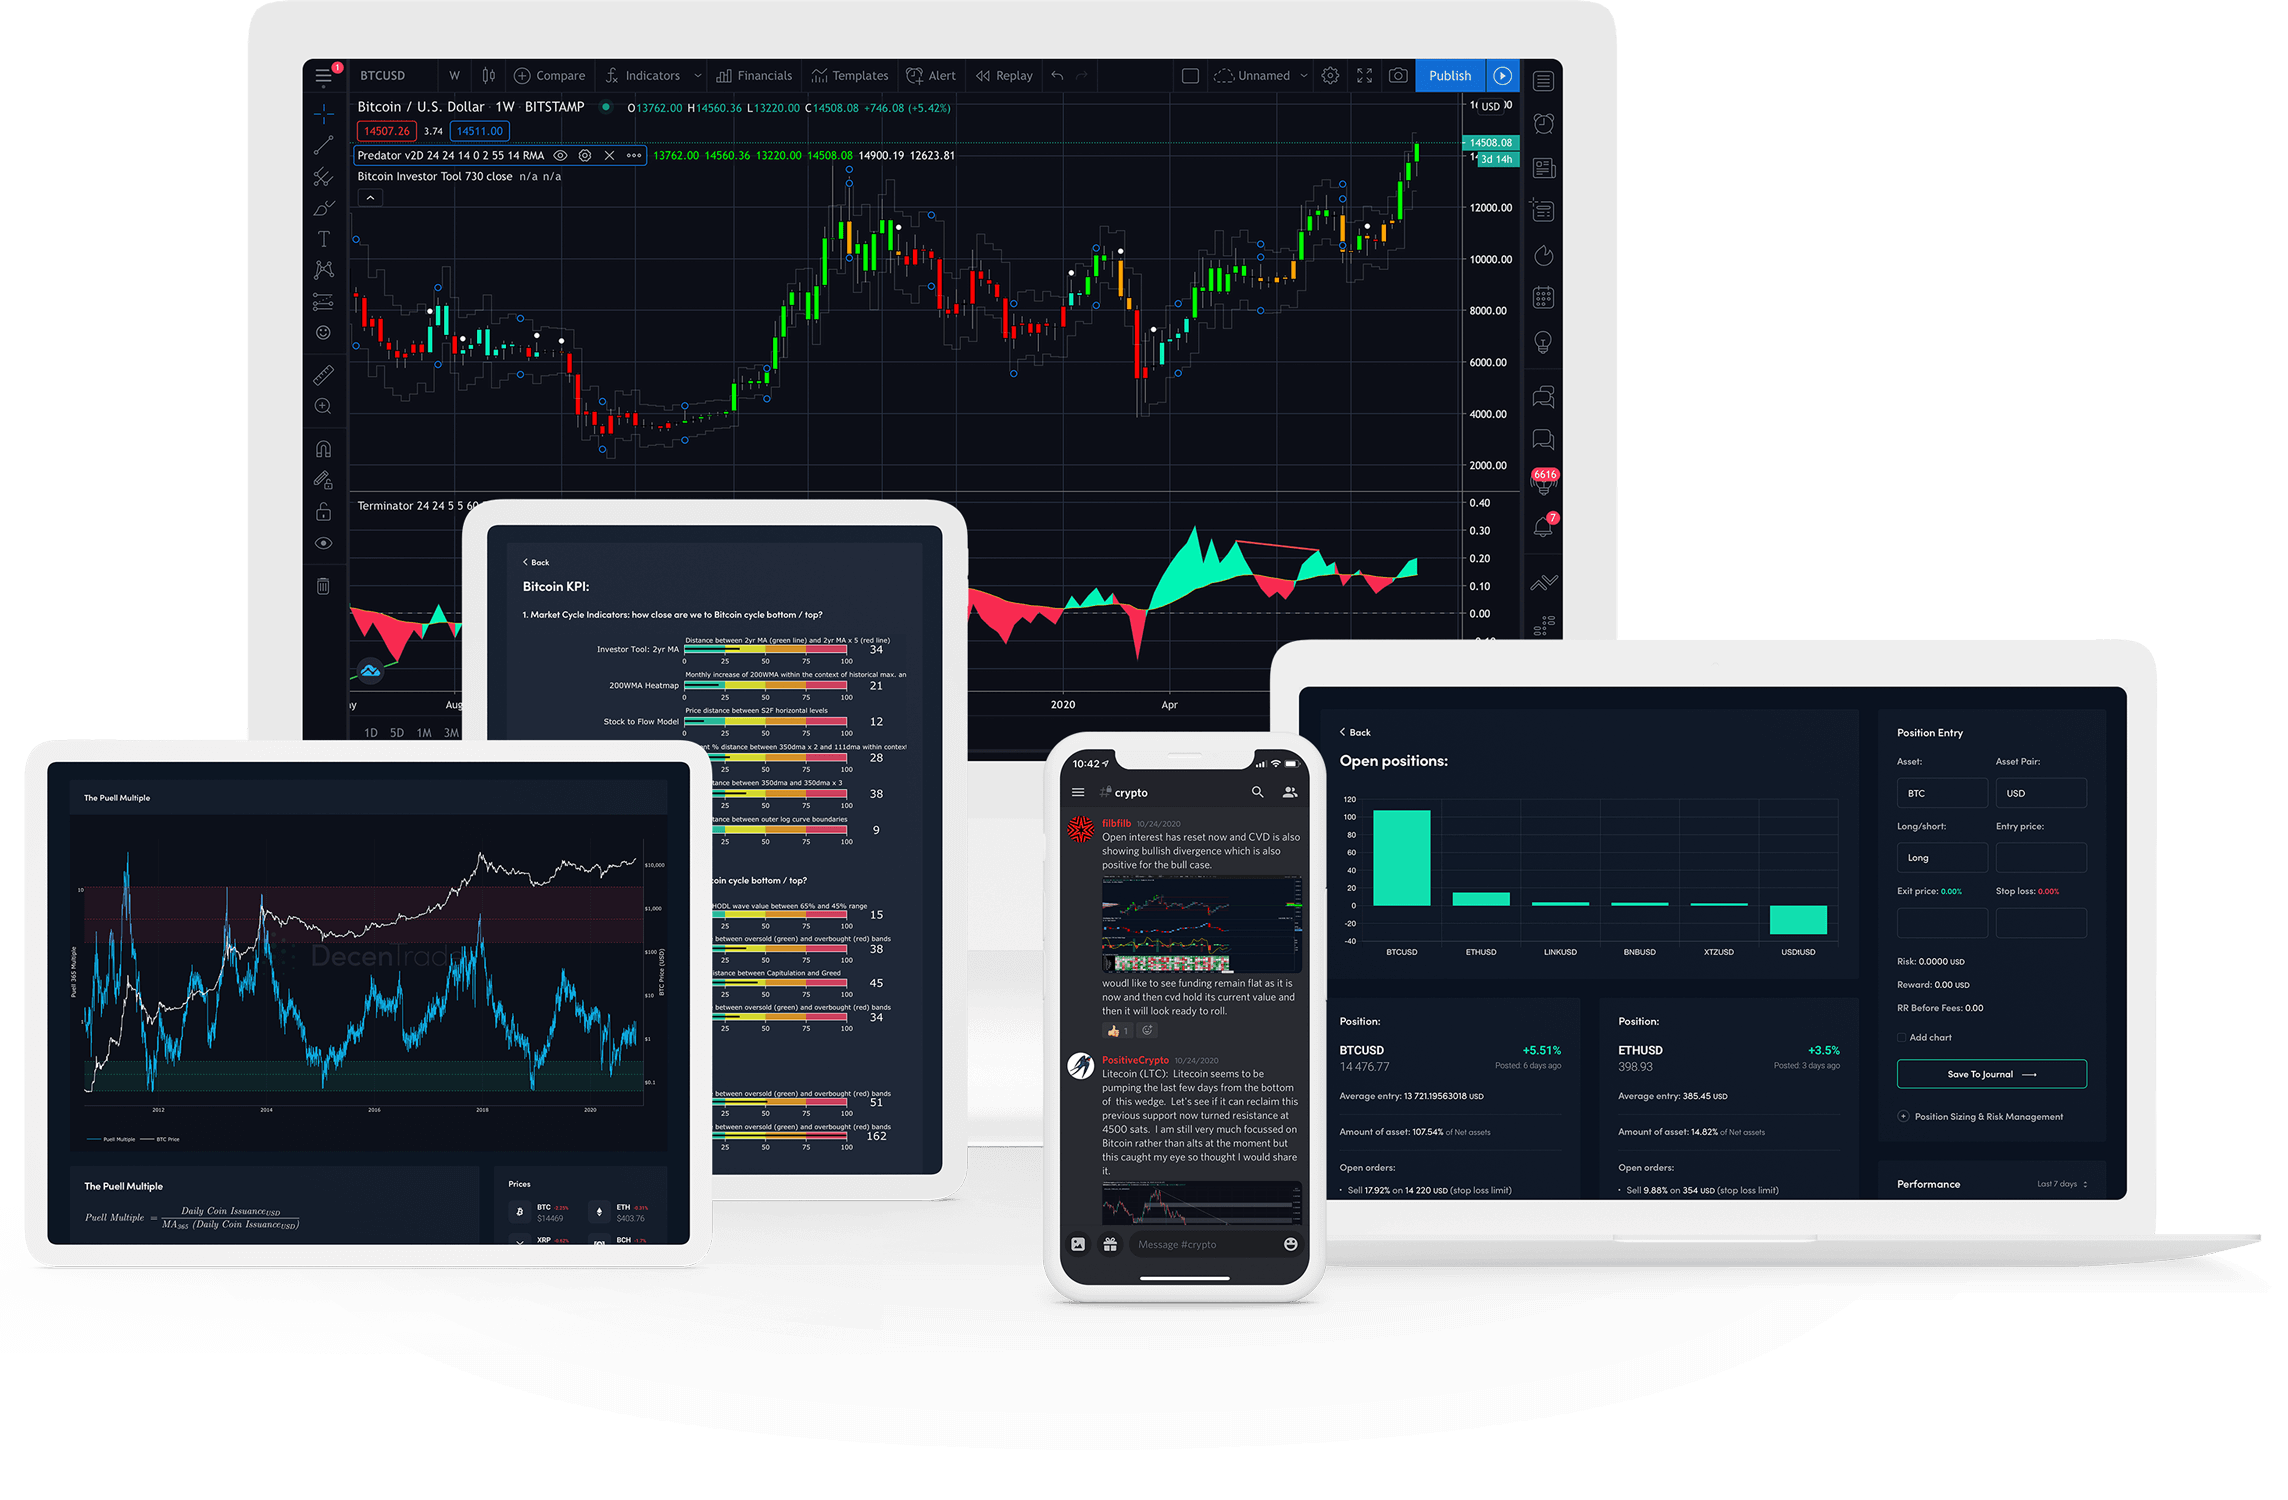 Introducing the New Tool for Traders… Commando by Decentrader